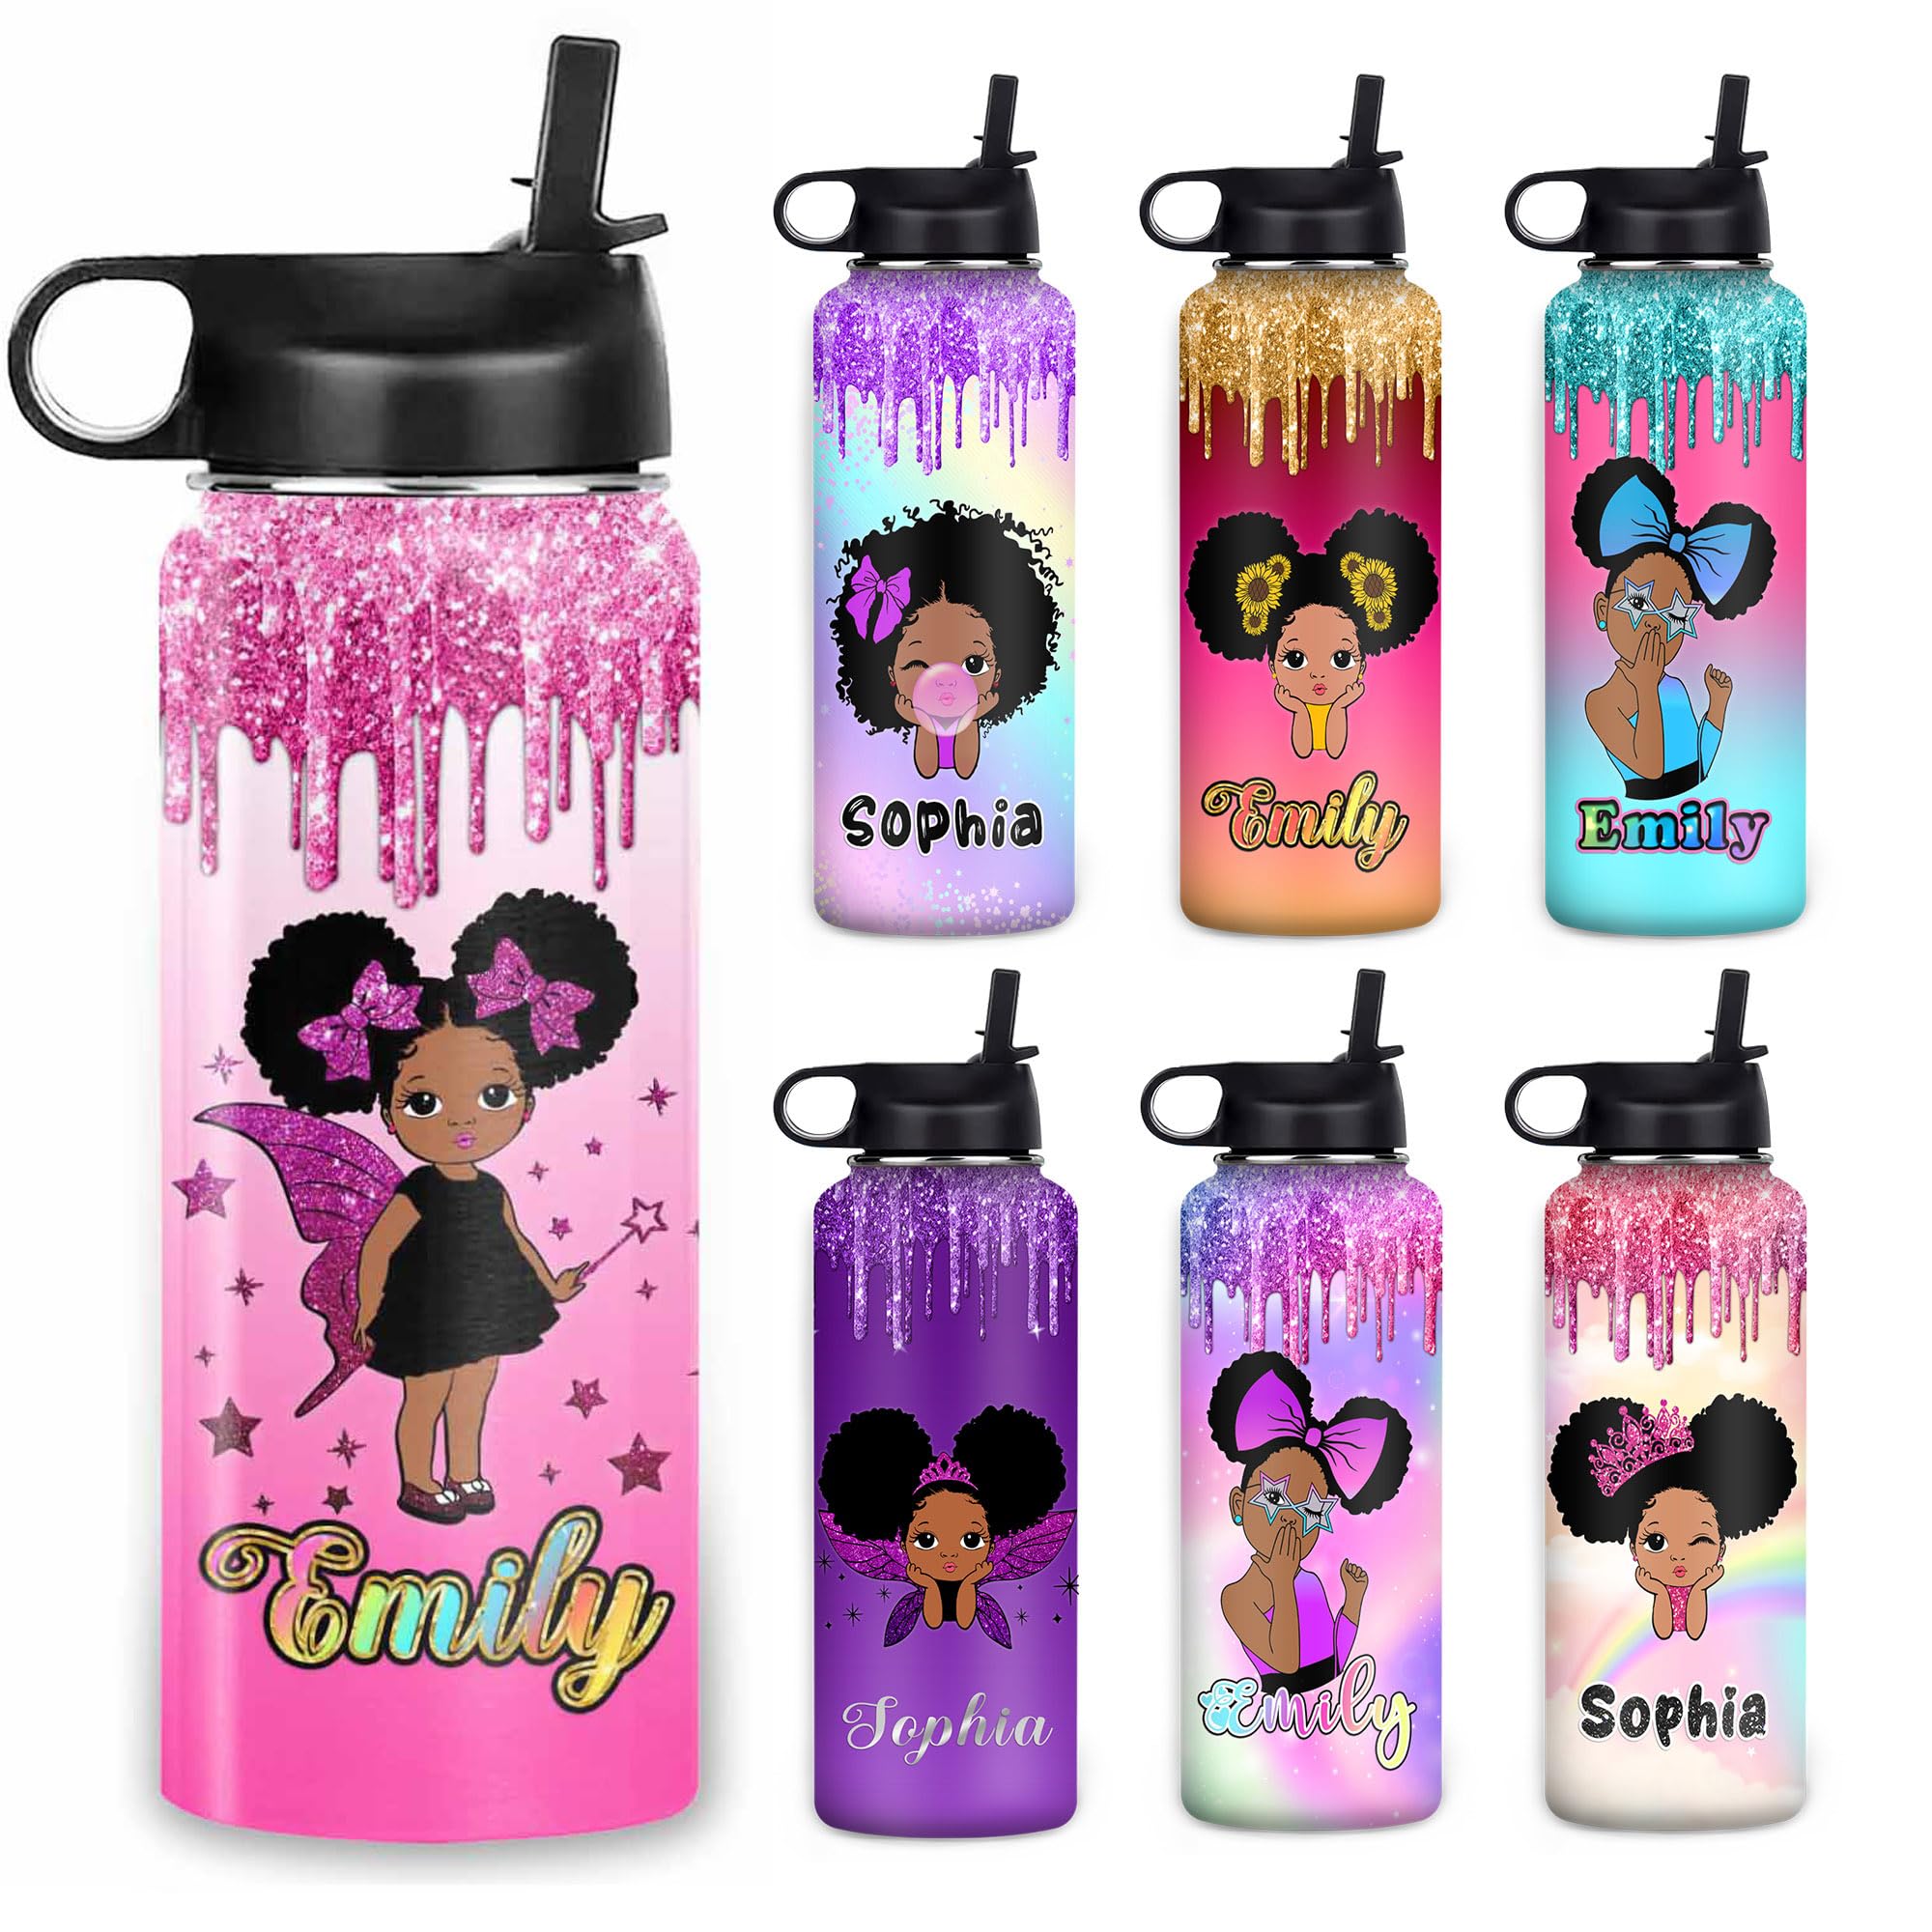 Caisuedawn Personalized Girls Water Bottle Print 18oz/32oz Custom Name Stainless Steel for Kid Sport Water Bottle with Straw Insulated Handle Waterbottle Gift for Teen School Sports Travel